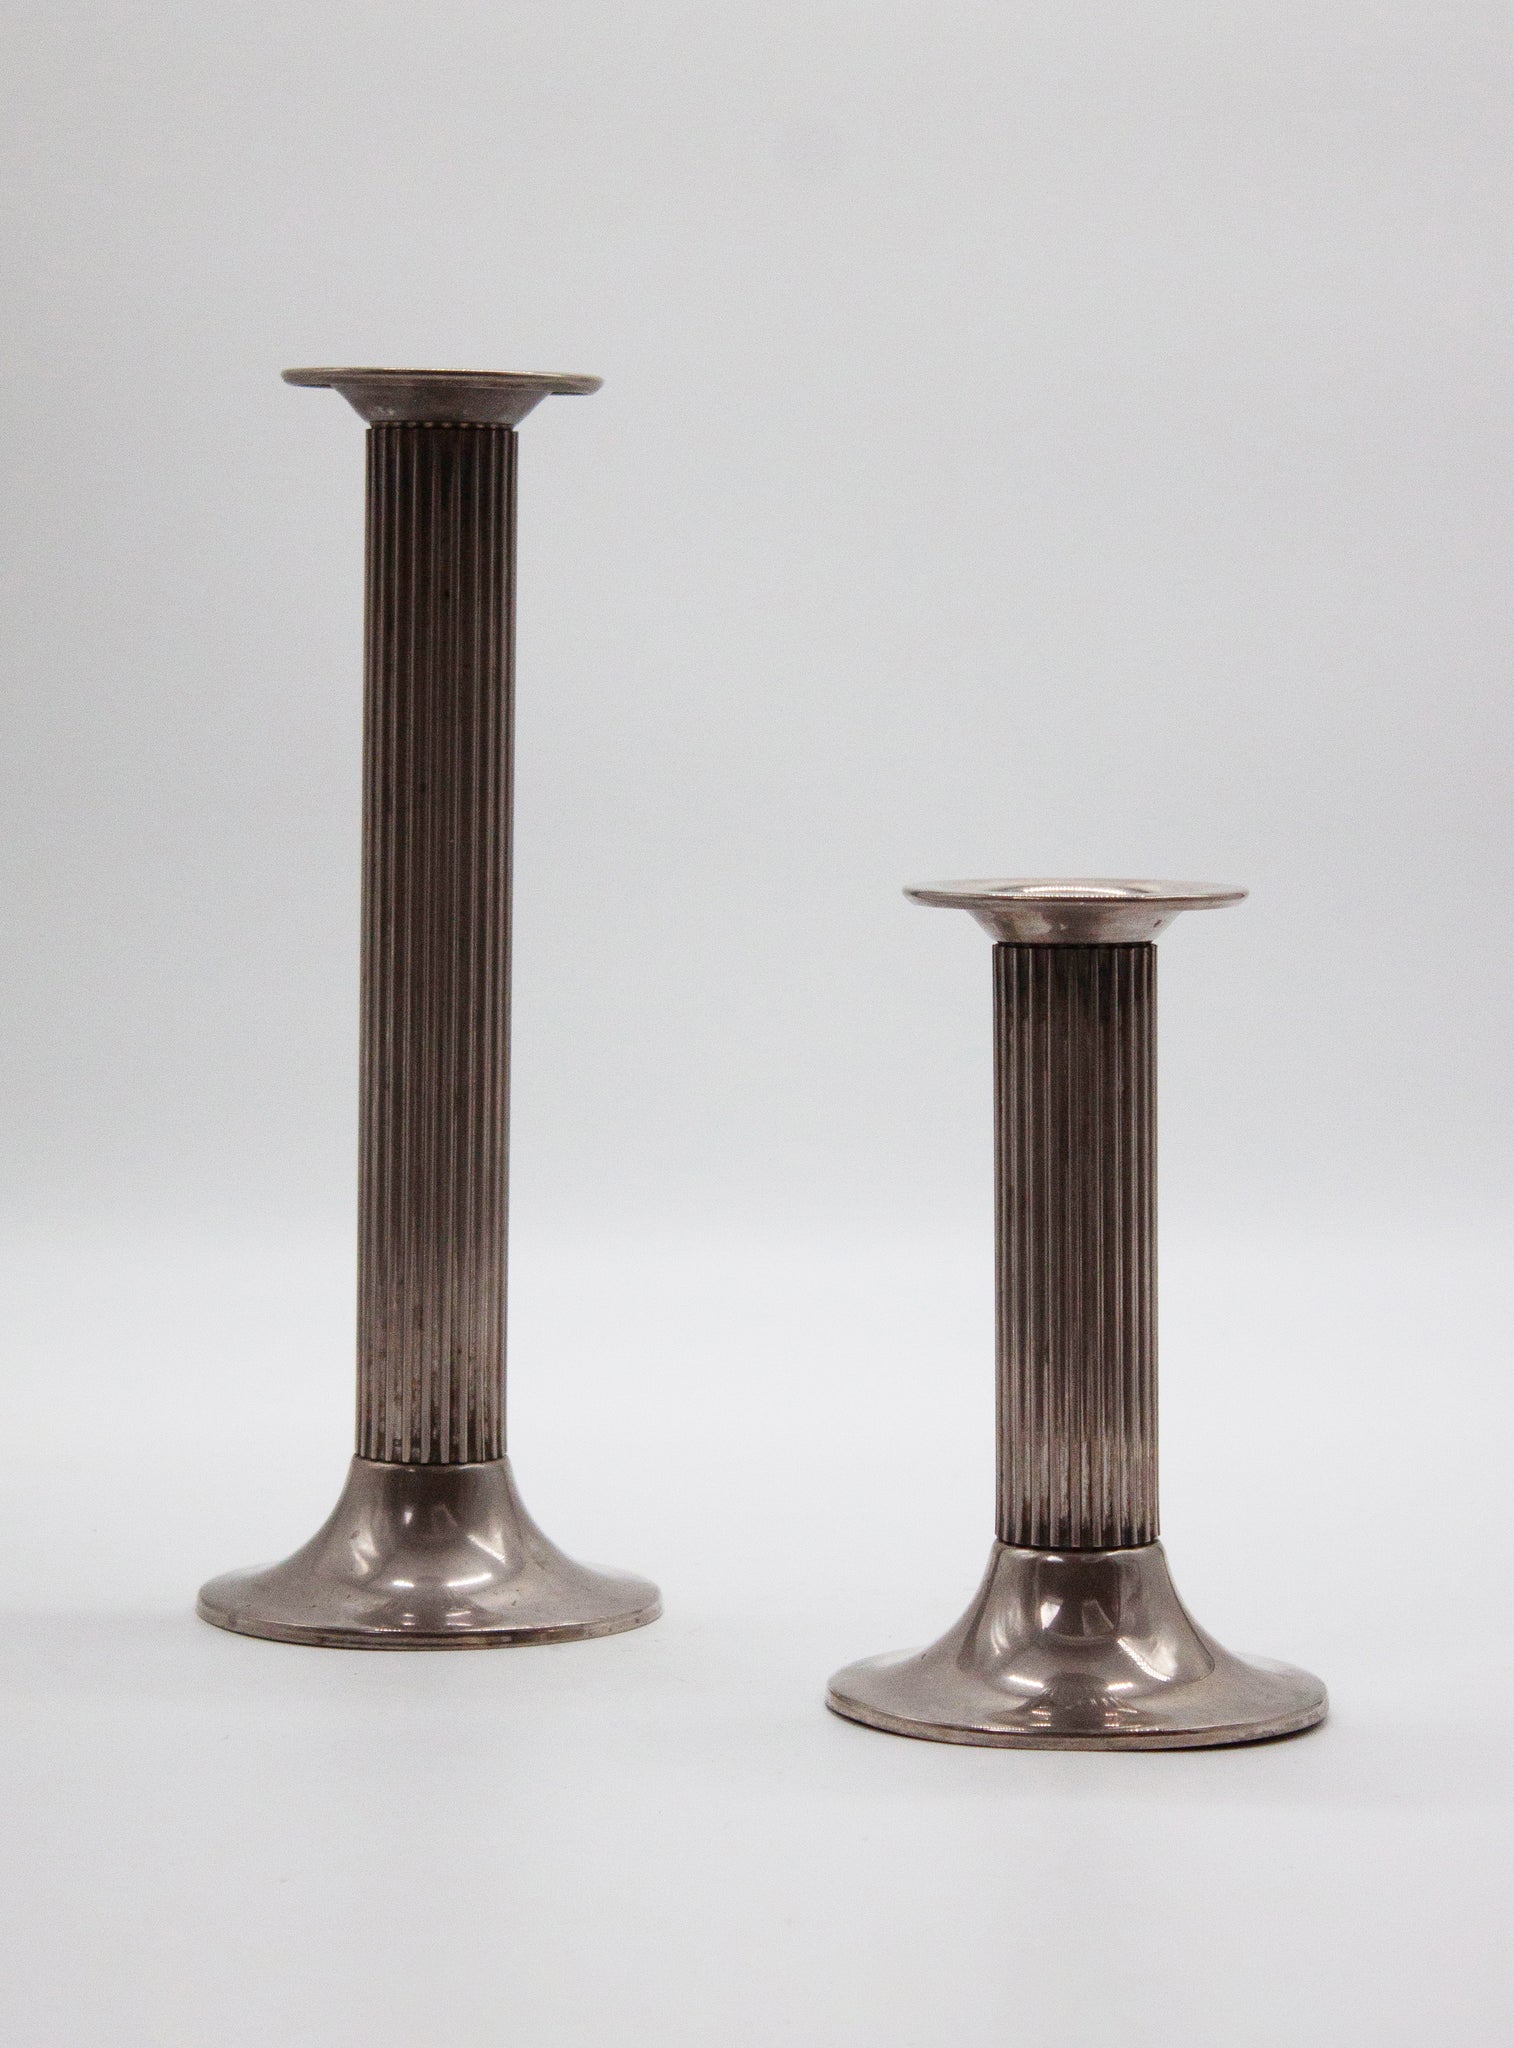 Pillar Candle Holders (Silver Plated)